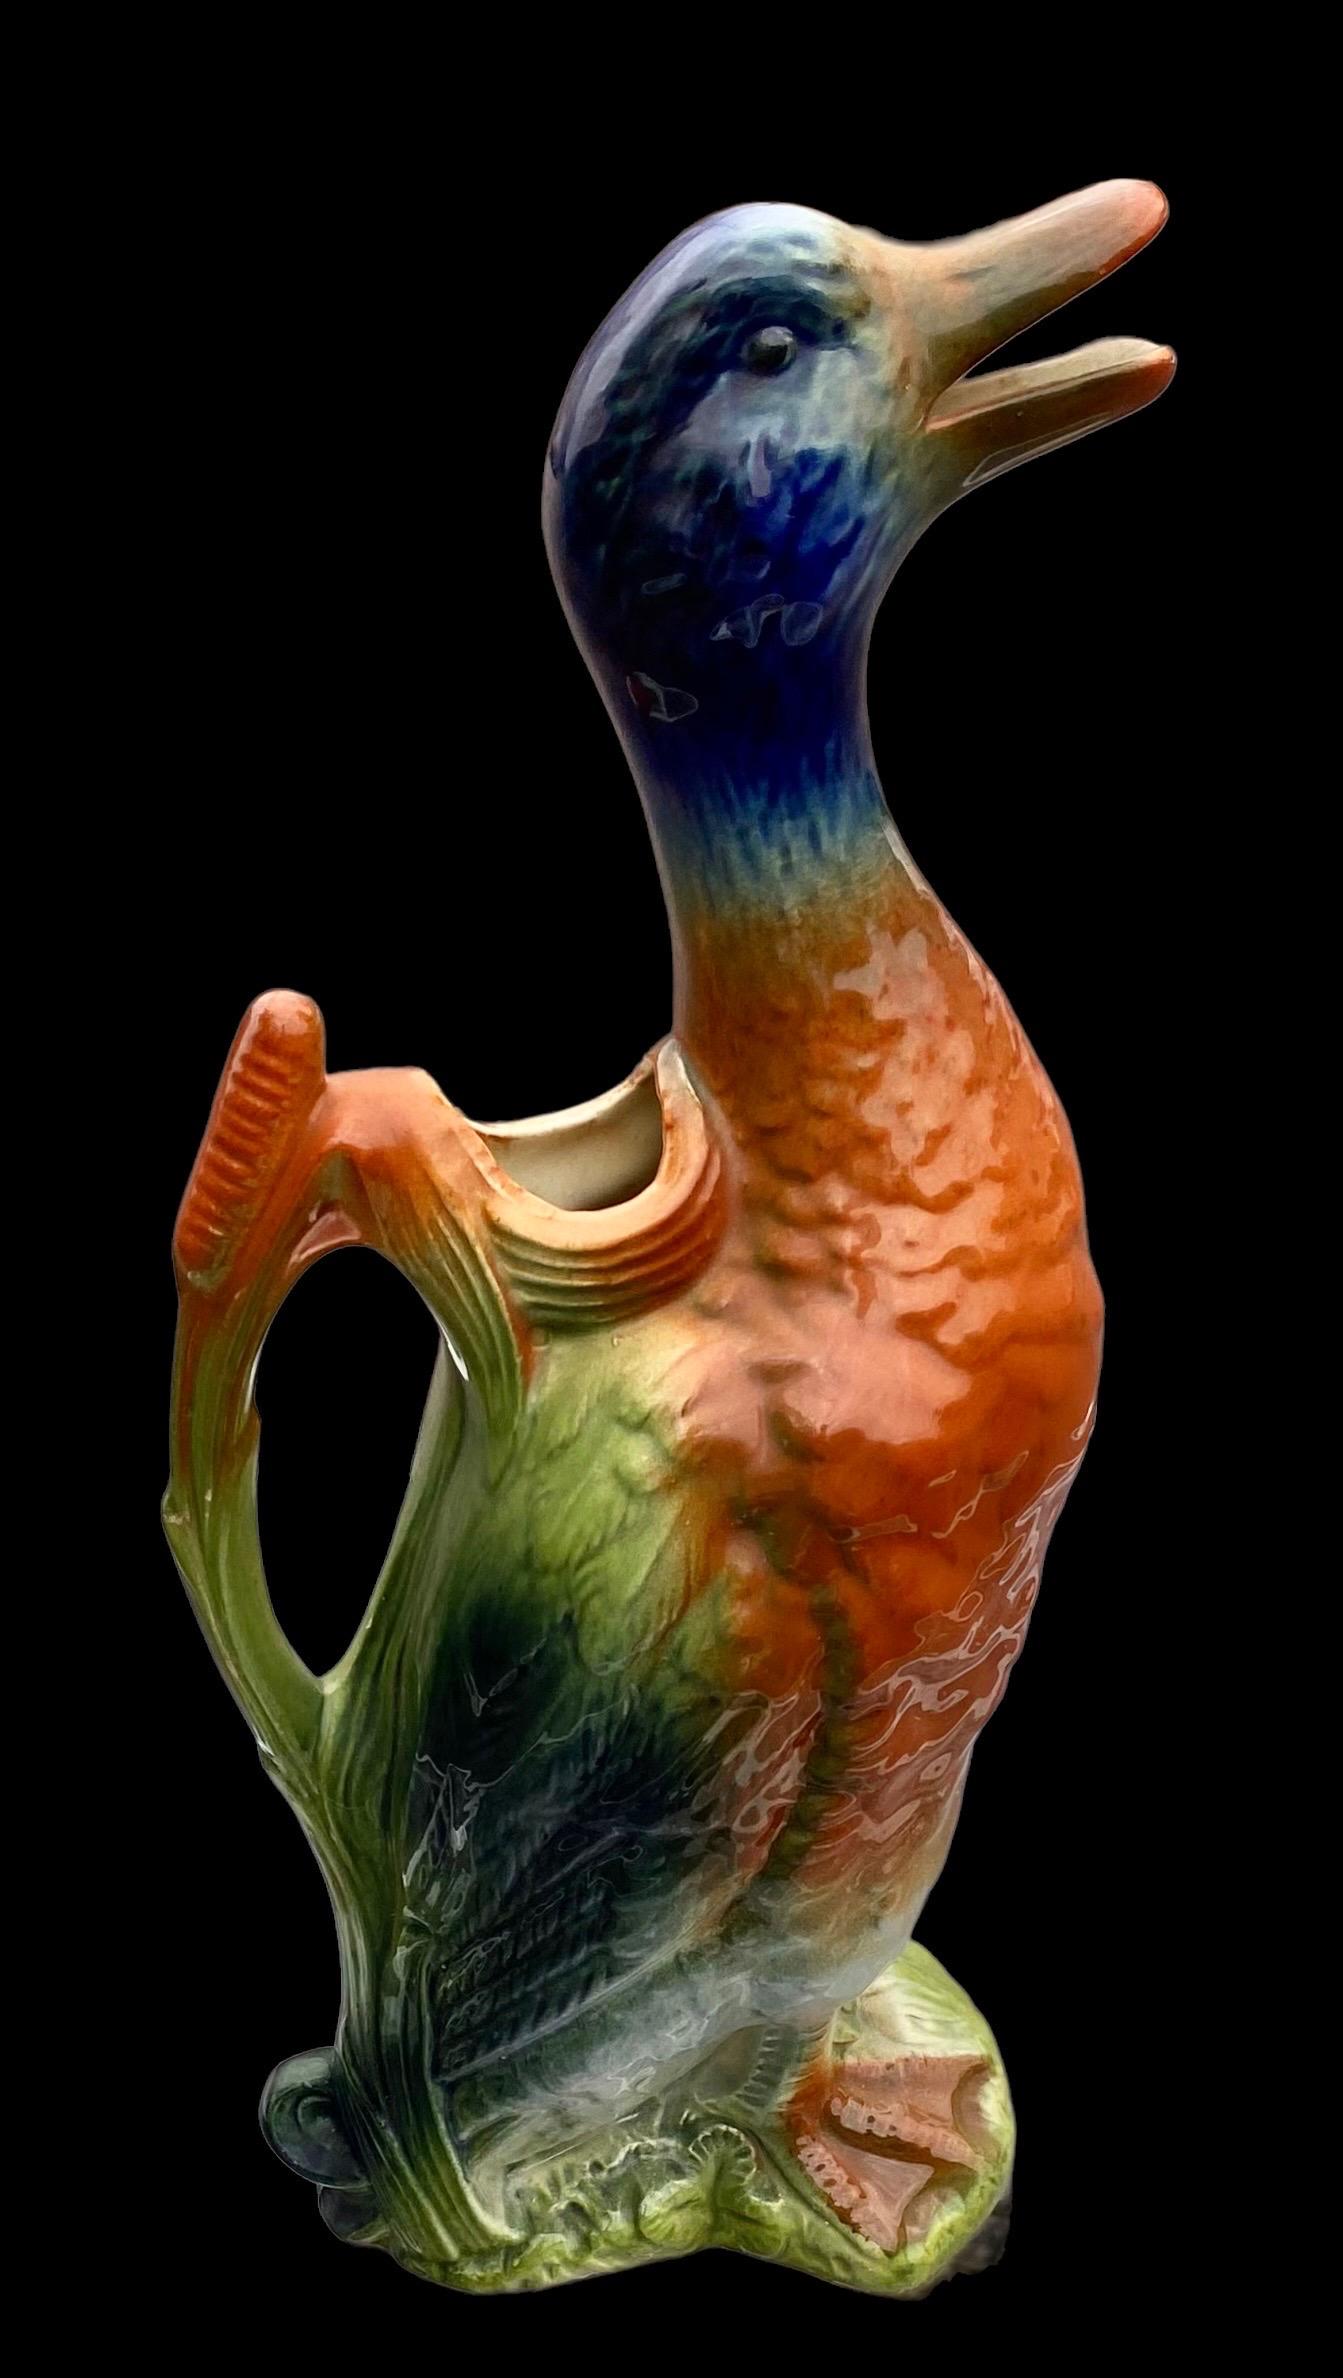 This exceptional Saint Clement majolica drake, mallard water pitcher will bring joy to any table. Highly collectable with brilliant colors and texture and all hand crafted at the highly respected and revered Saint Clement factory in France. A feast